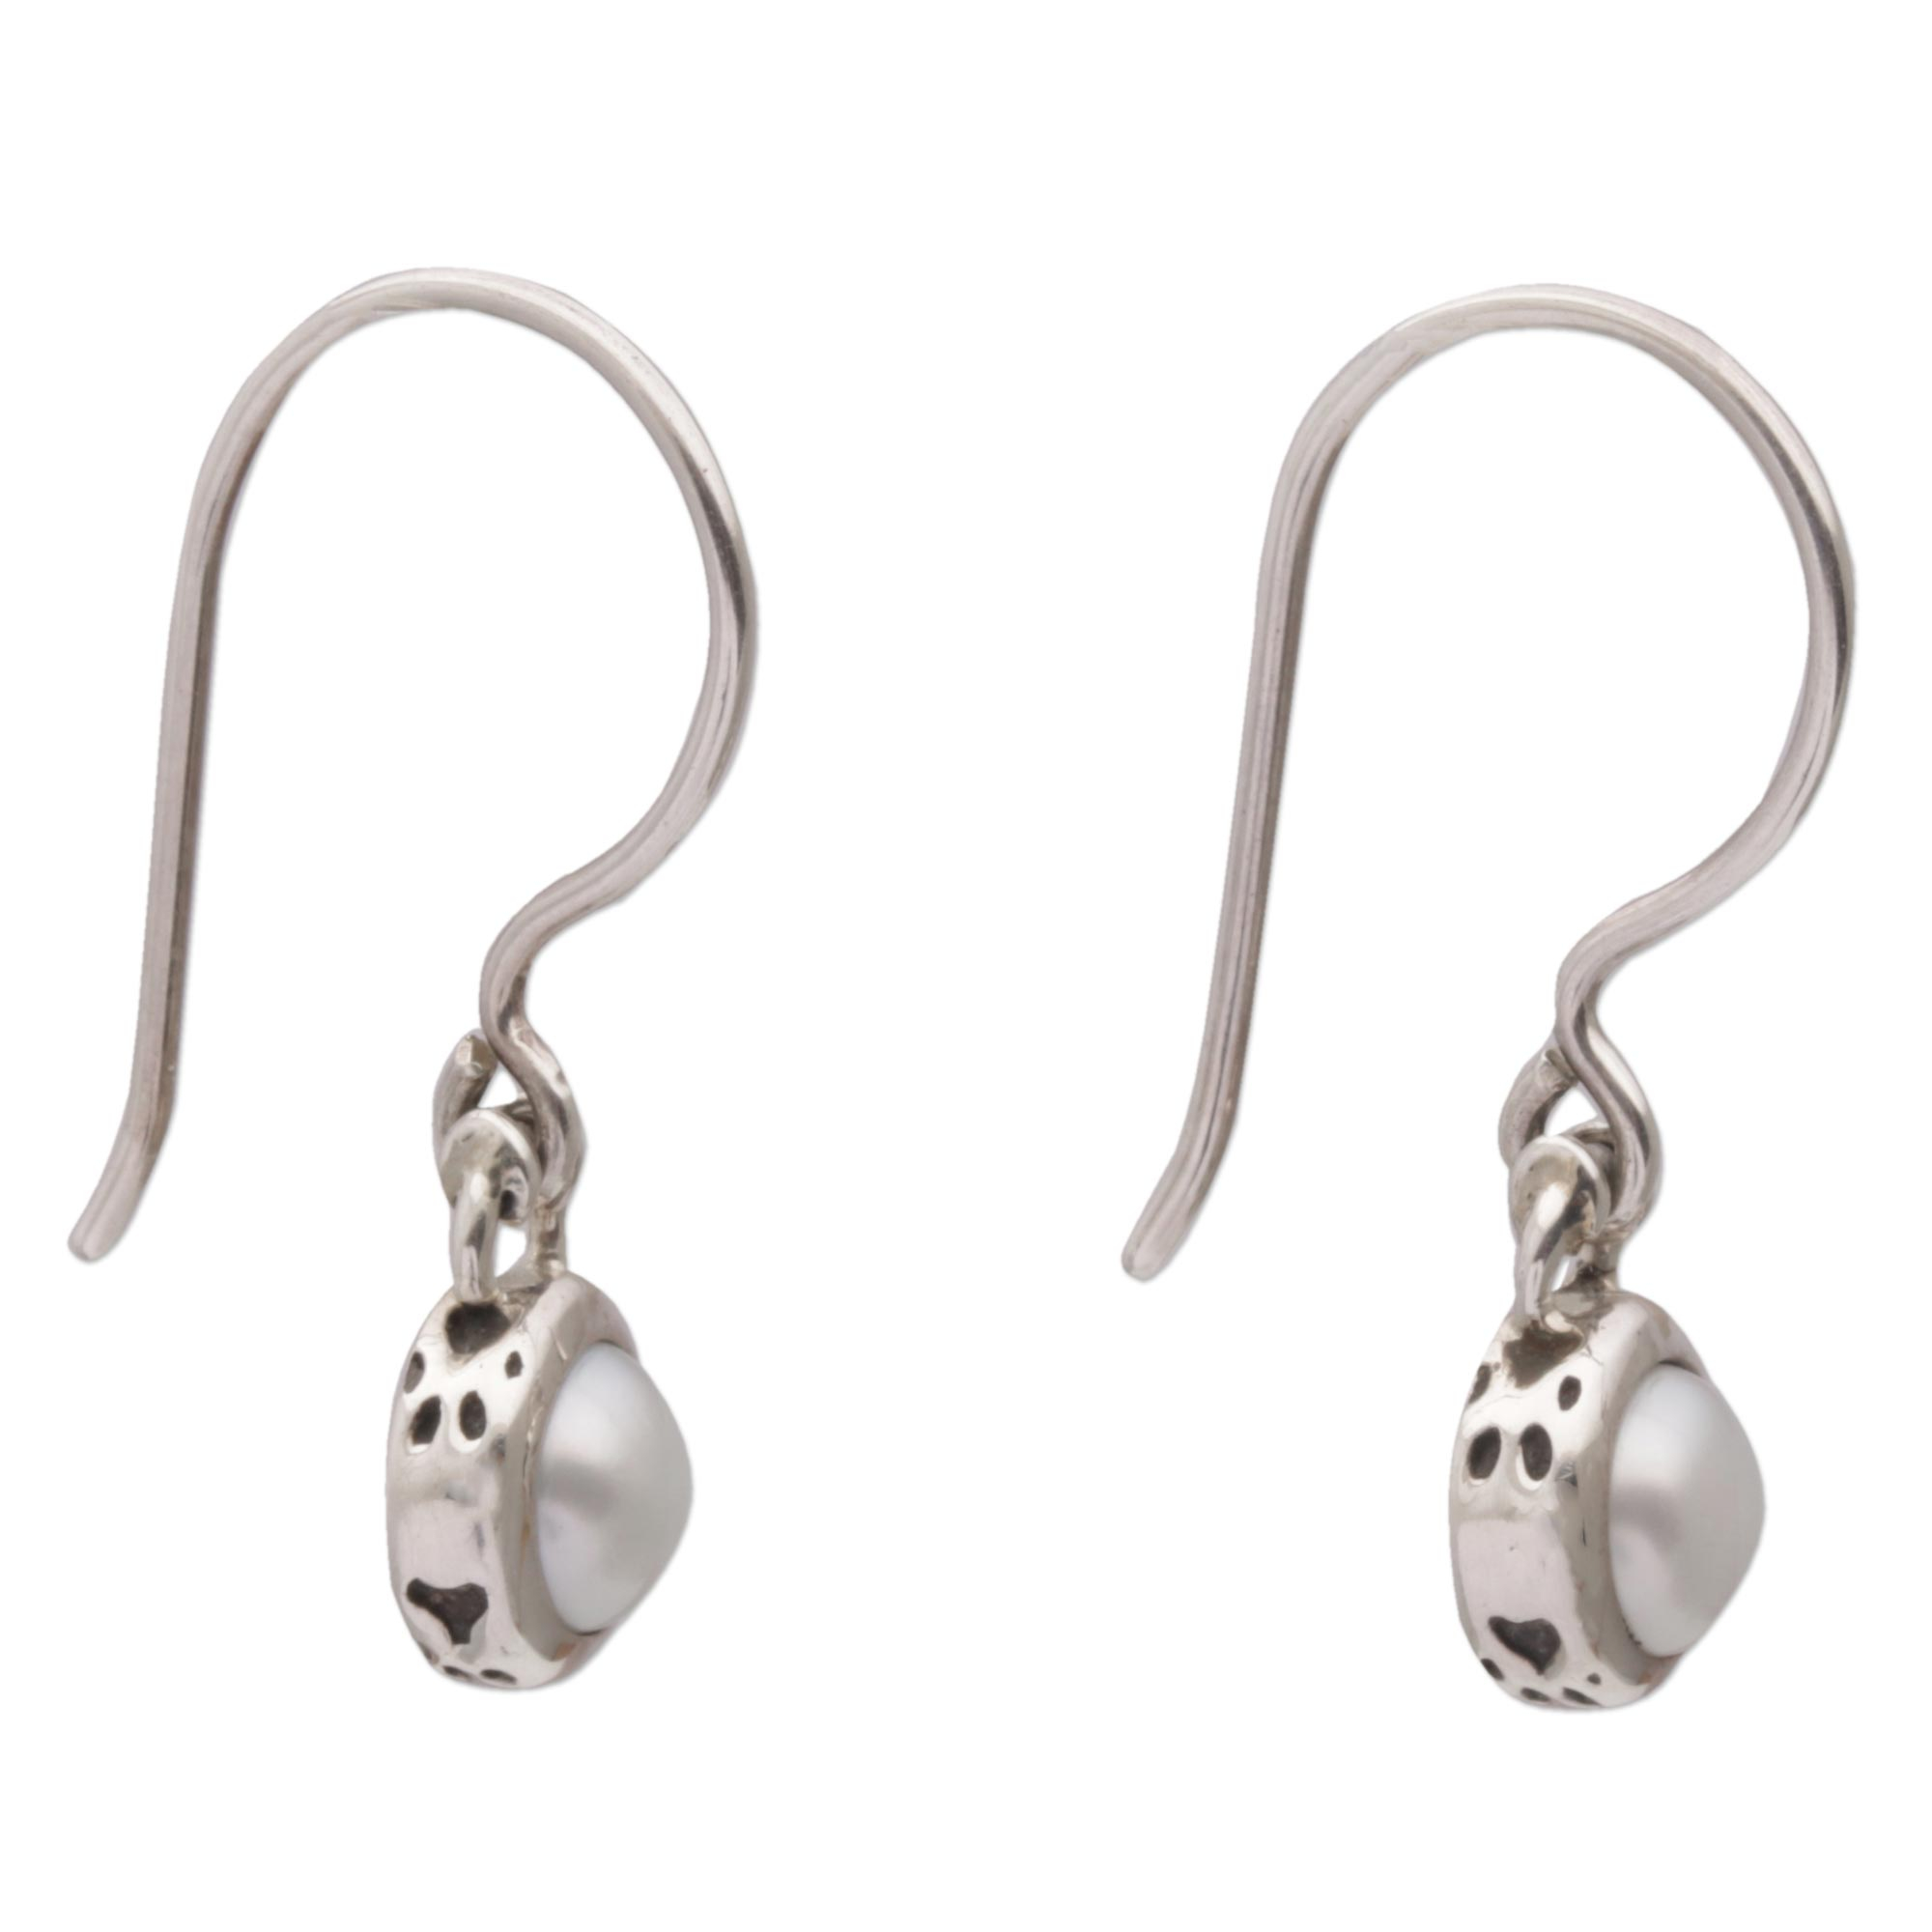 Cultured Pearl Paw Motif Dangle Earrings from Bali - Glowing Paws | NOVICA